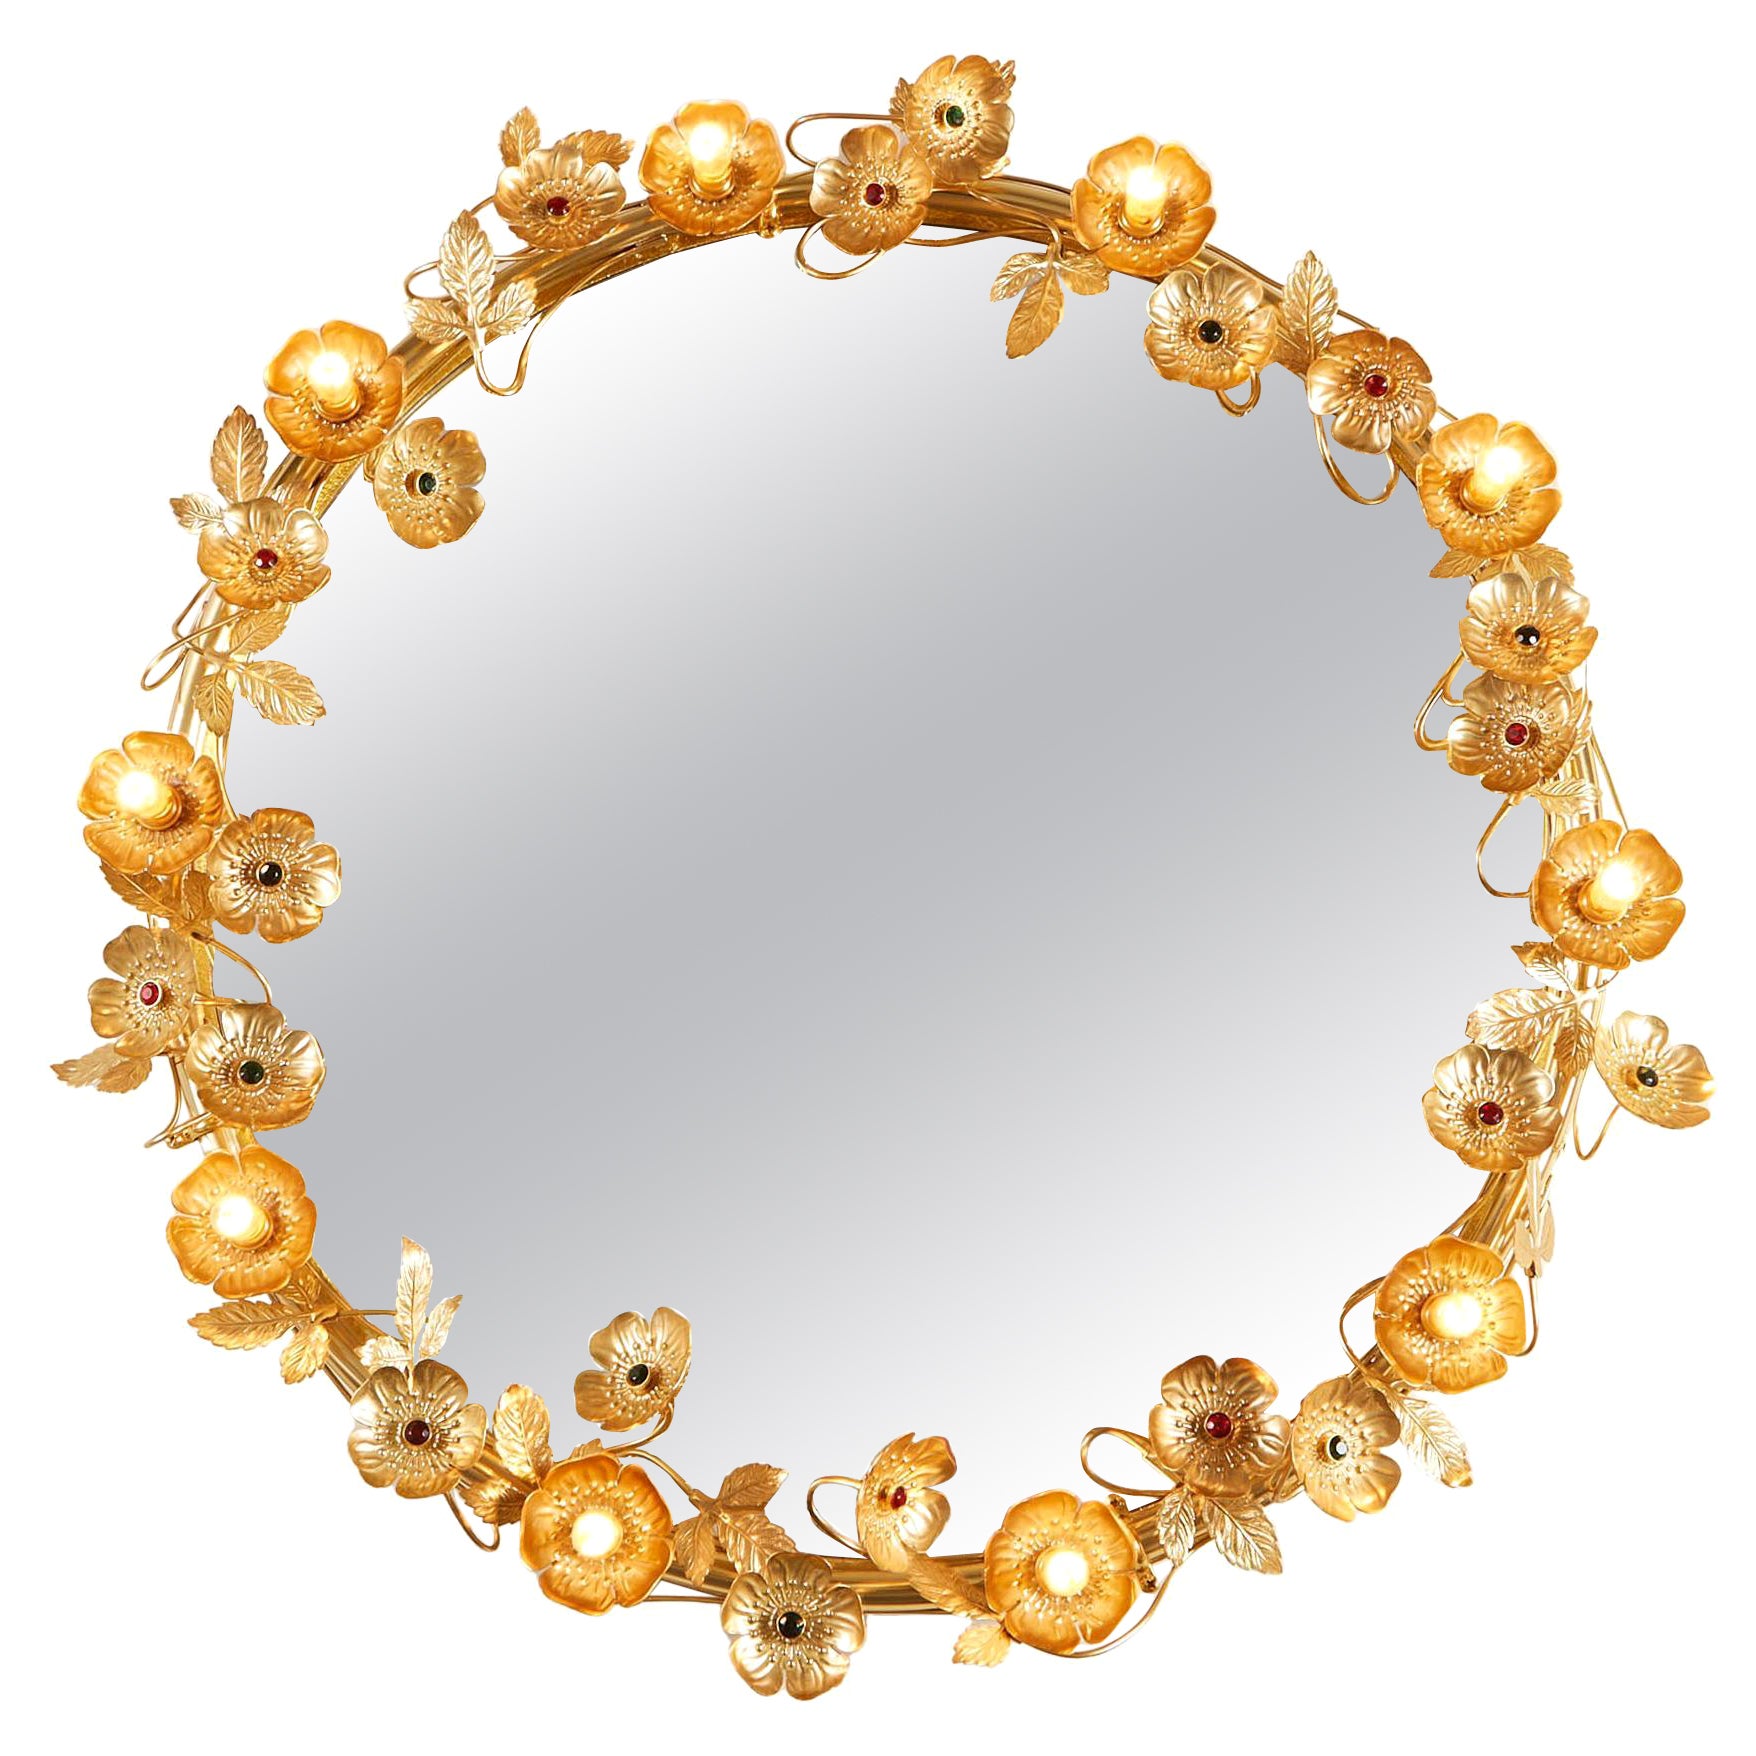 Super glamorous contemporary wall mirror from the VW collection that comprises of delicate gold brass flowers and leaves that encircle the beveled mirror. Each flower is finished with a ruby or emerald centre unless it holds one of the small